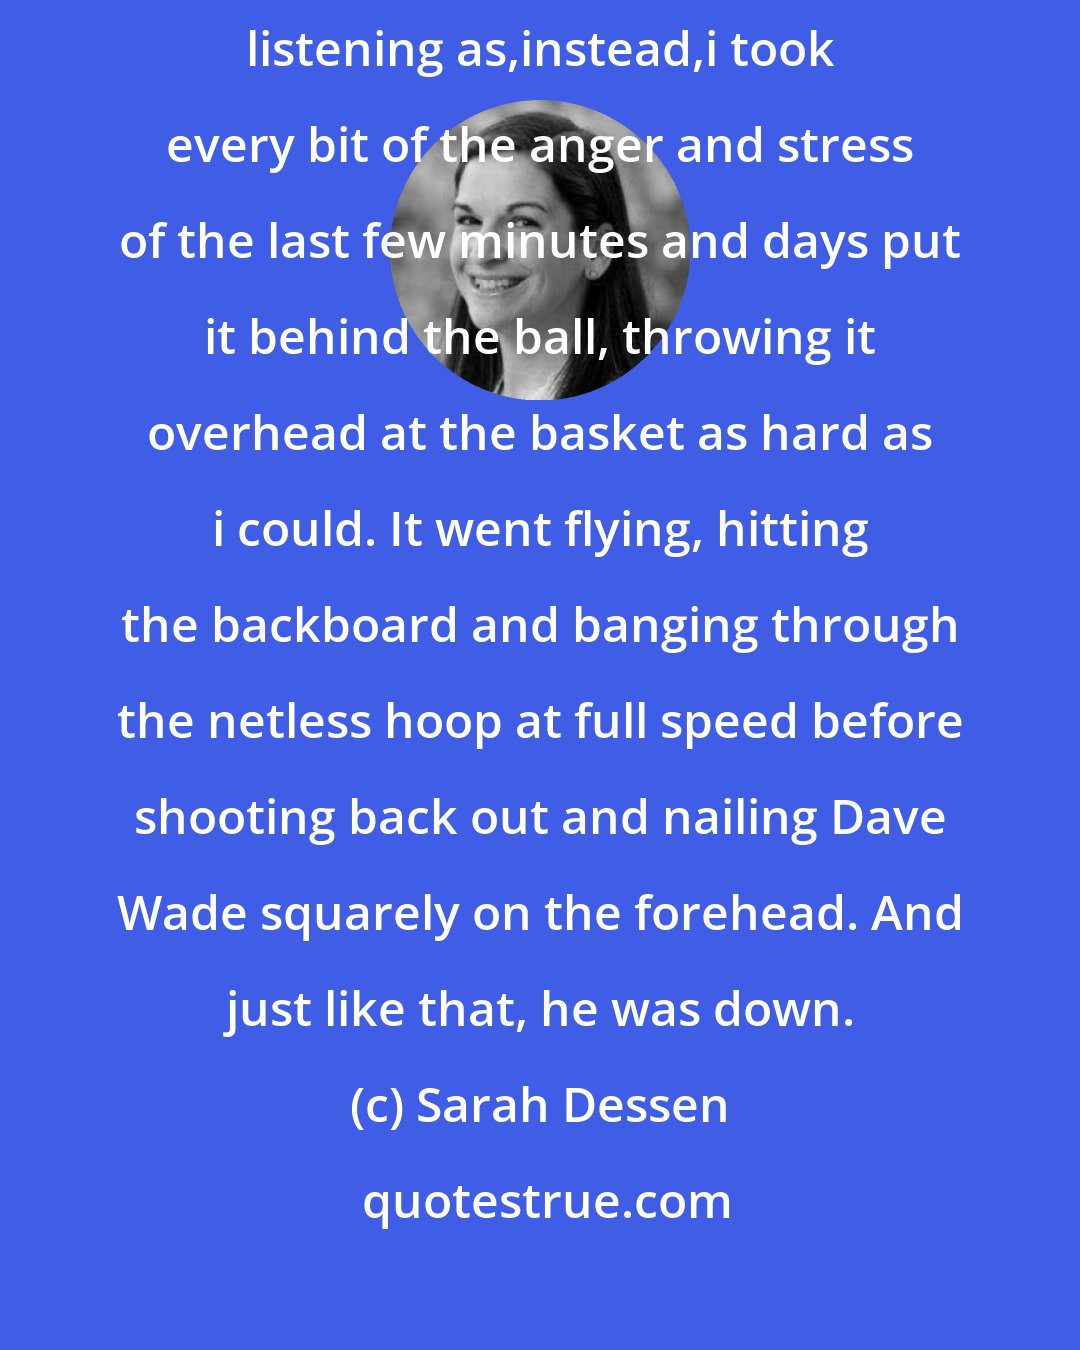 Sarah Dessen: Sorry!' Dave's friend yelled when he saw me. 'That was my-' But i wasn't listening as,instead,i took every bit of the anger and stress of the last few minutes and days put it behind the ball, throwing it overhead at the basket as hard as i could. It went flying, hitting the backboard and banging through the netless hoop at full speed before shooting back out and nailing Dave Wade squarely on the forehead. And just like that, he was down.